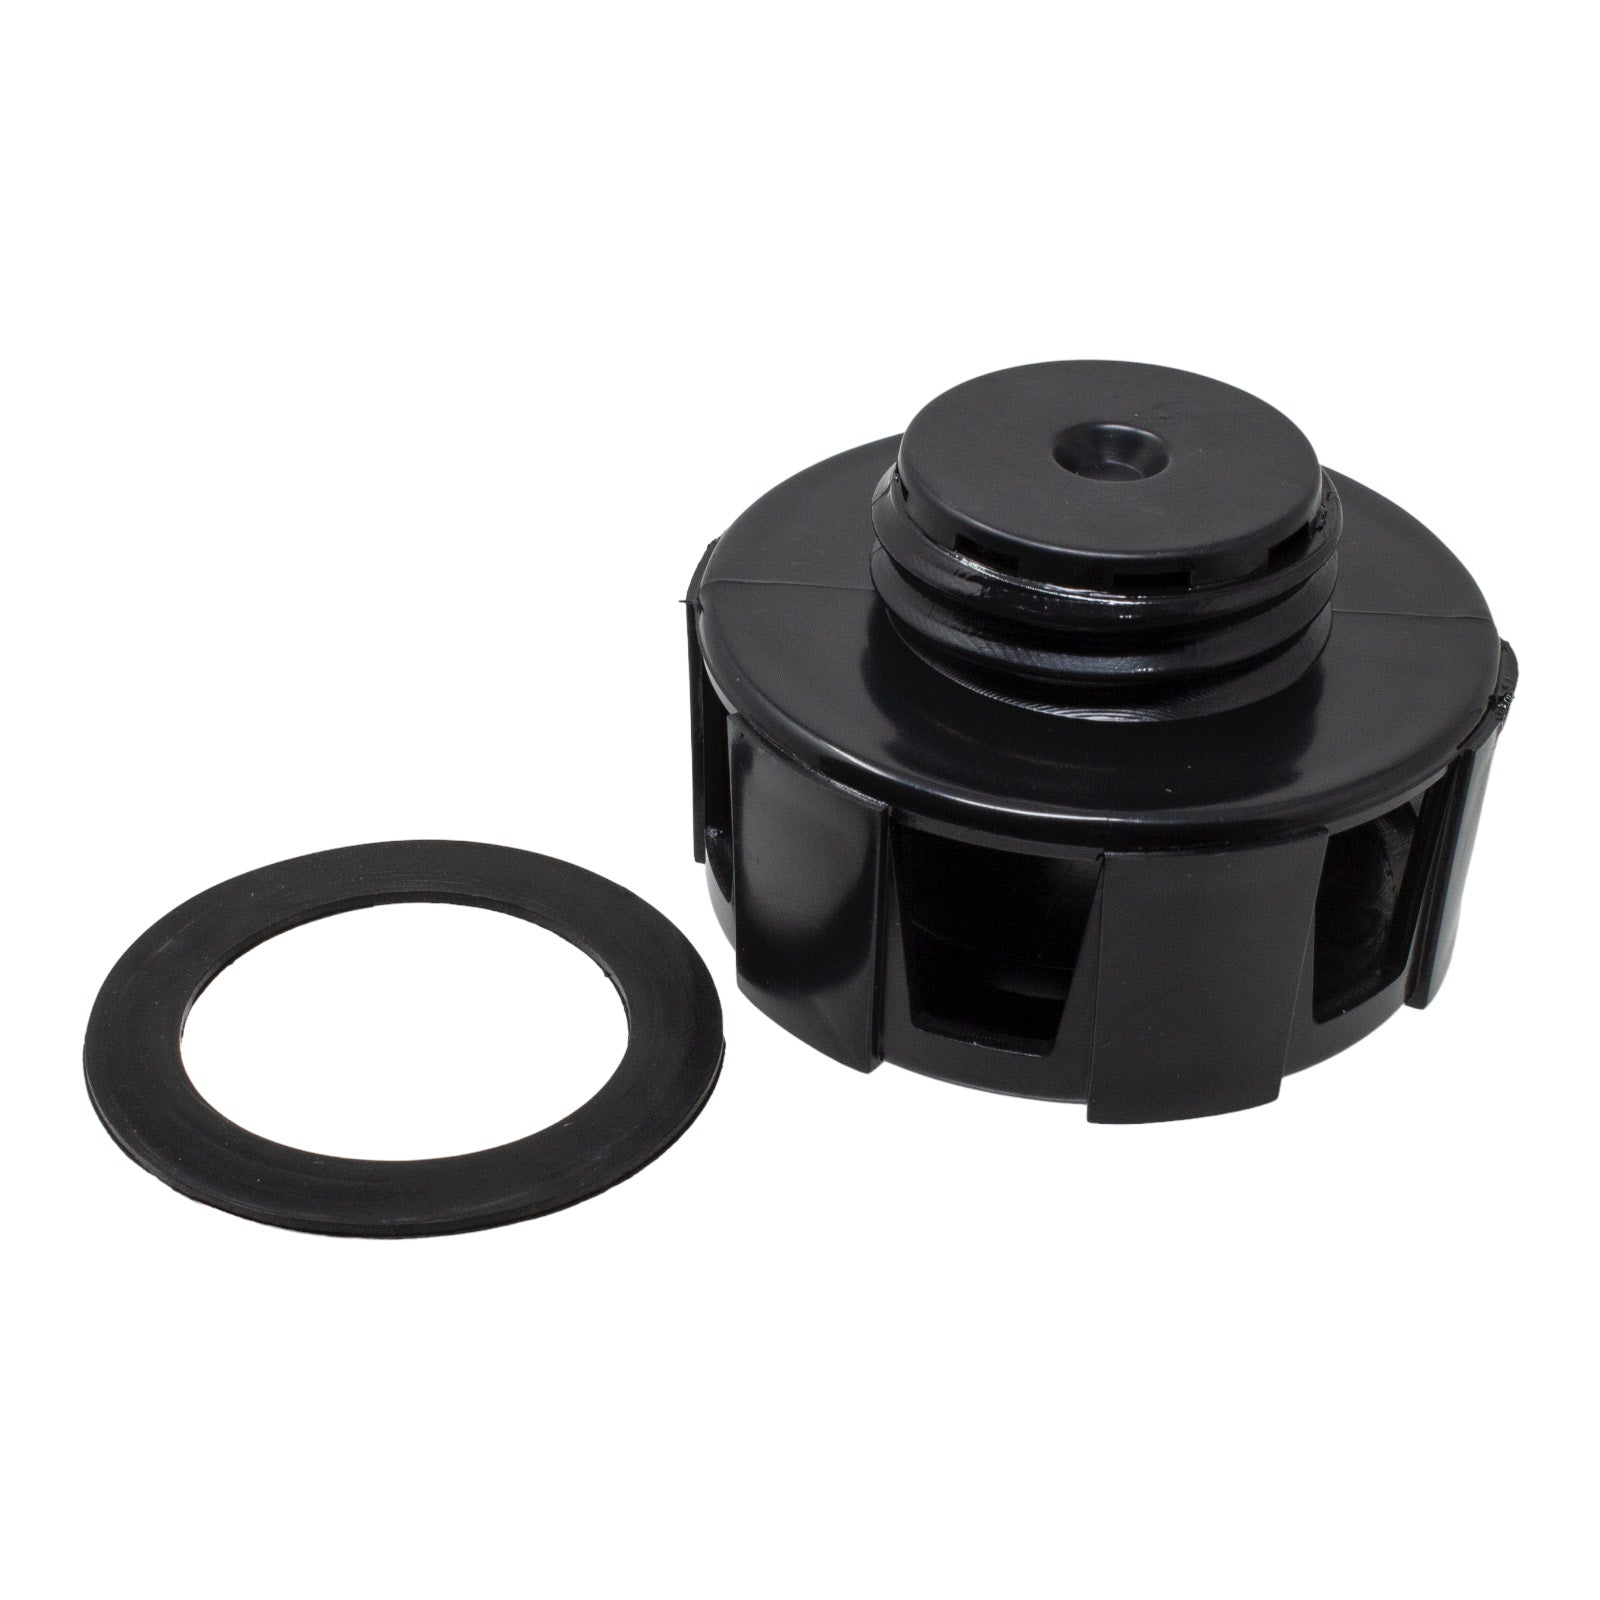 6728149, Hydraulic Oil Non-Vented Cap For Bobcat at Duraforce